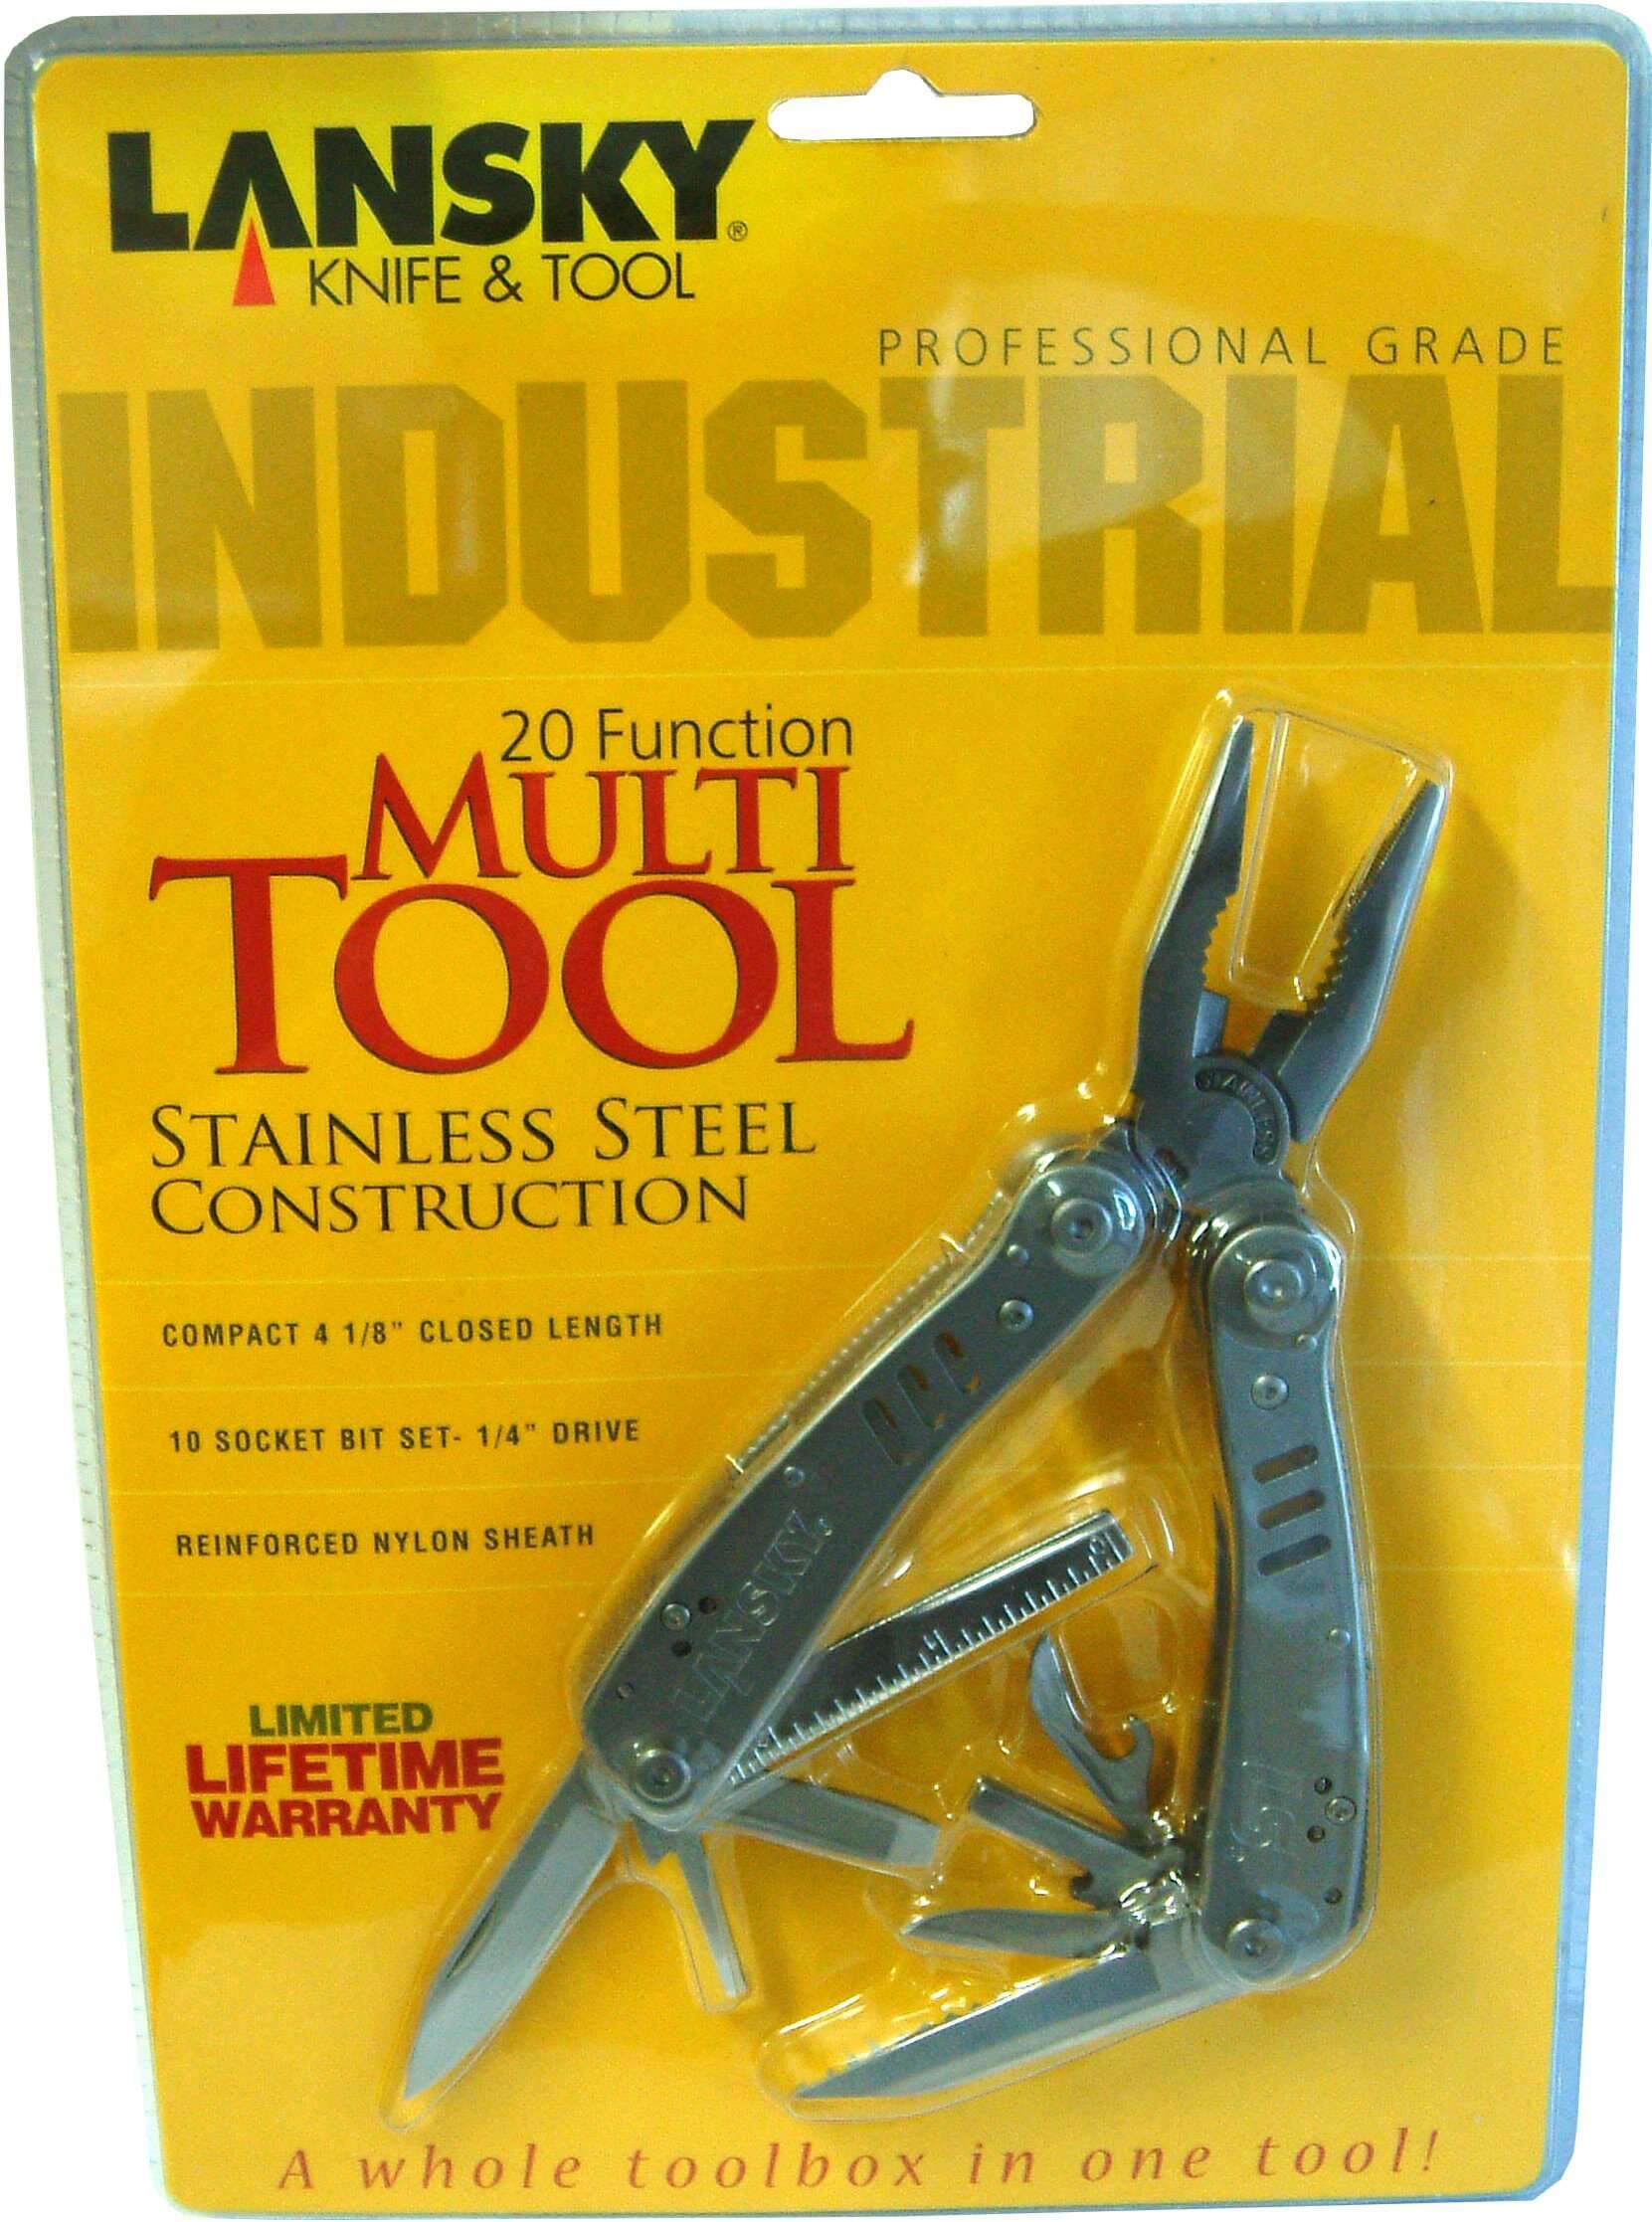 Lansky Multitool Stainless Steel 20-Function in Pouch